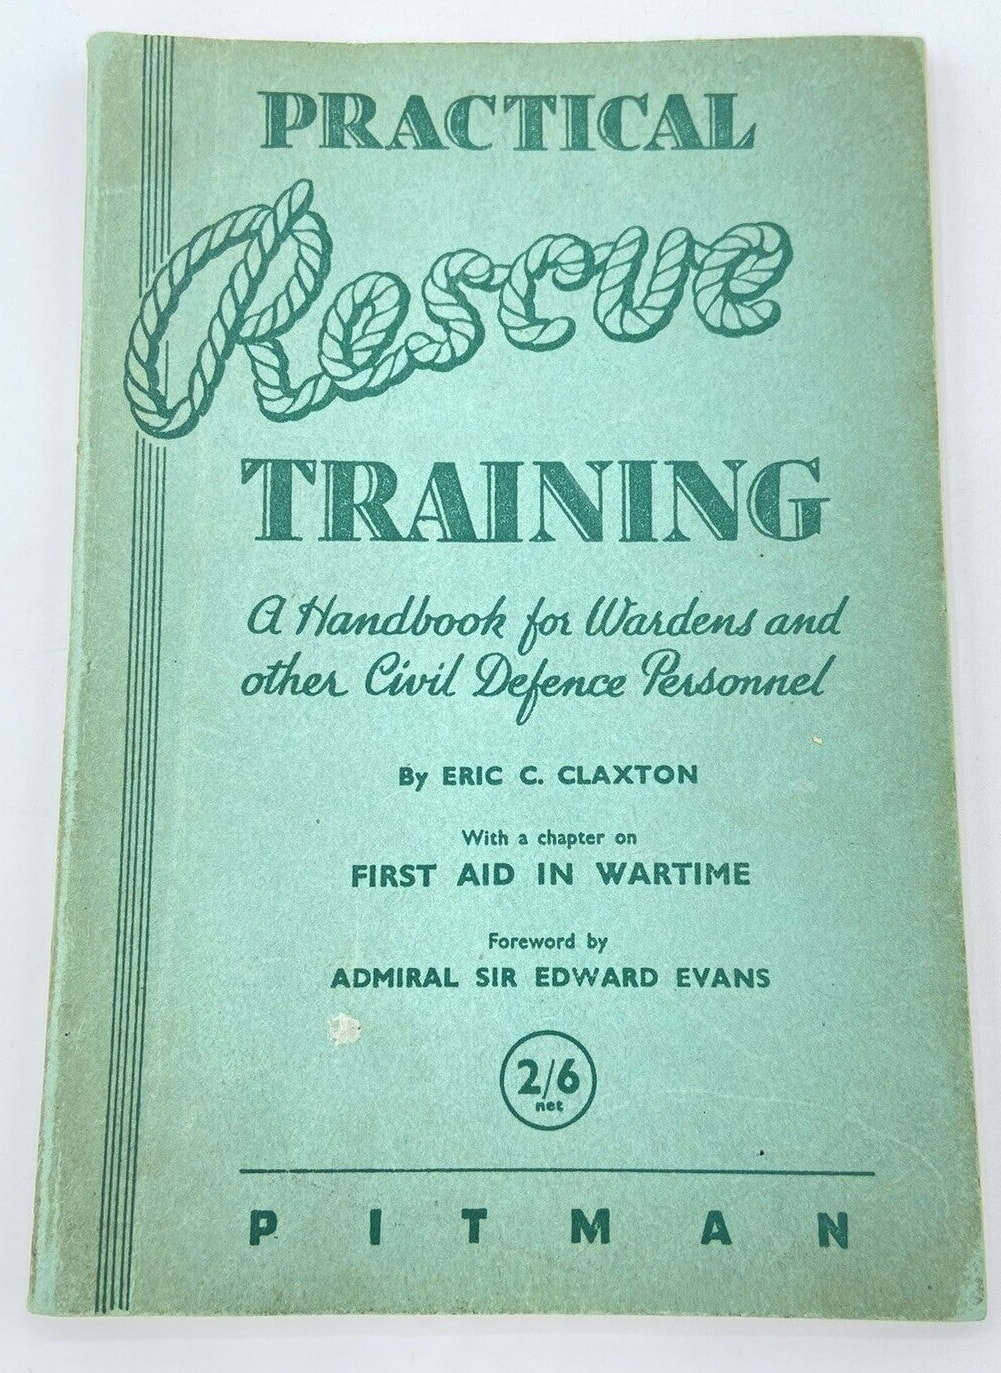 Practical Rescue Training Booklet by Eric Caxton